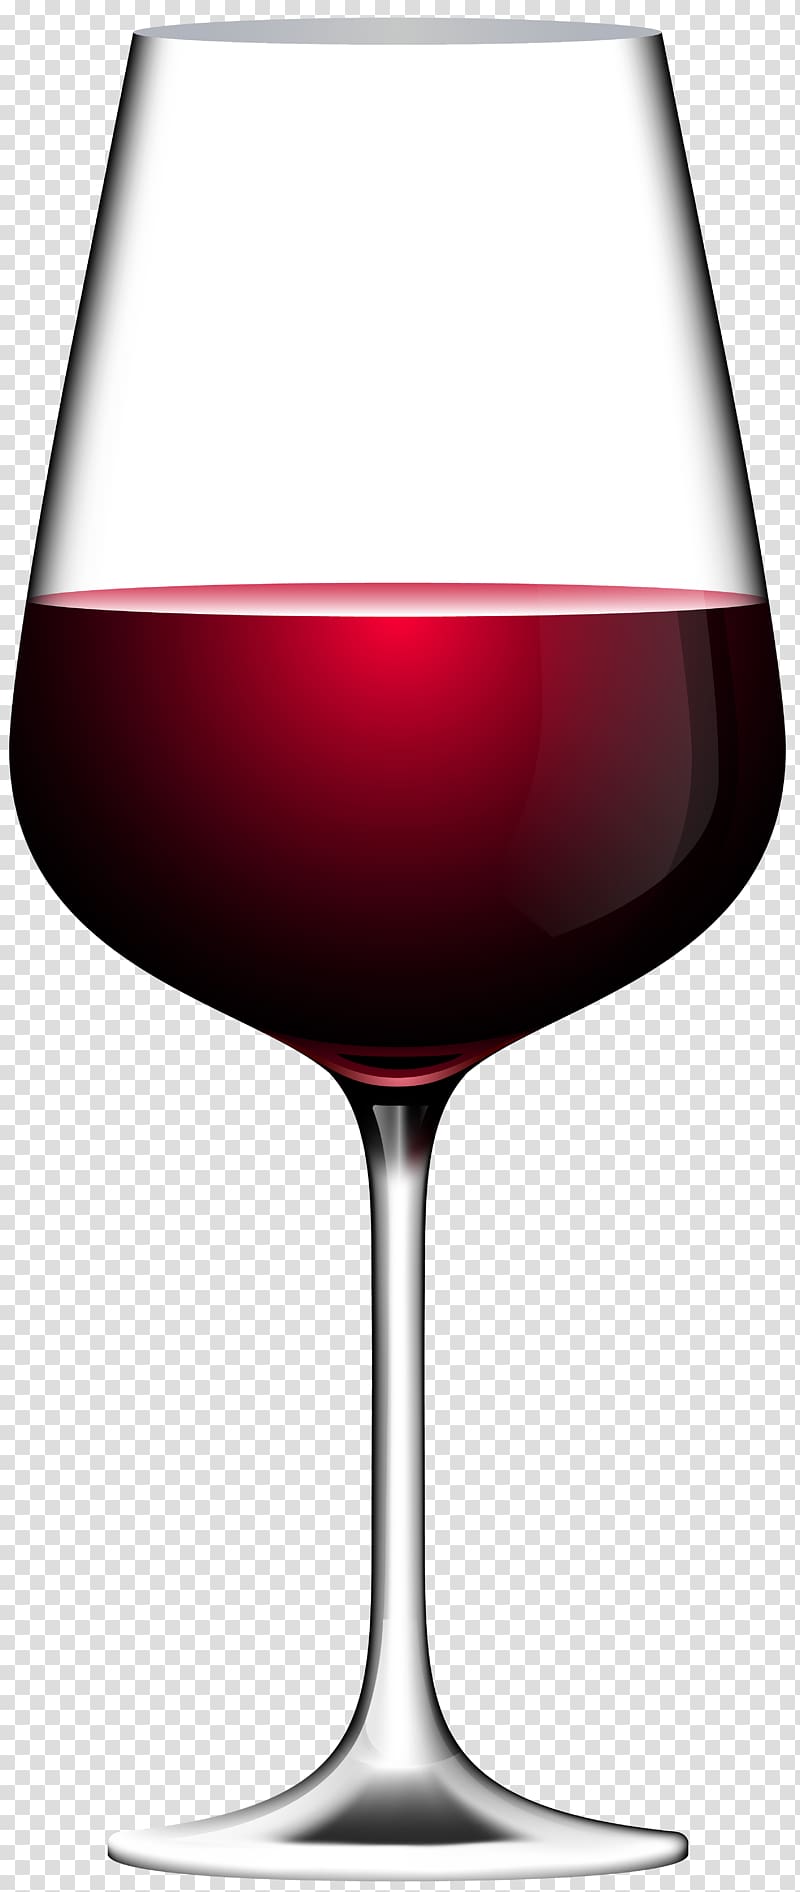 Red Wine White wine Orlando Wines Wine glass, Wine transparent background PNG clipart